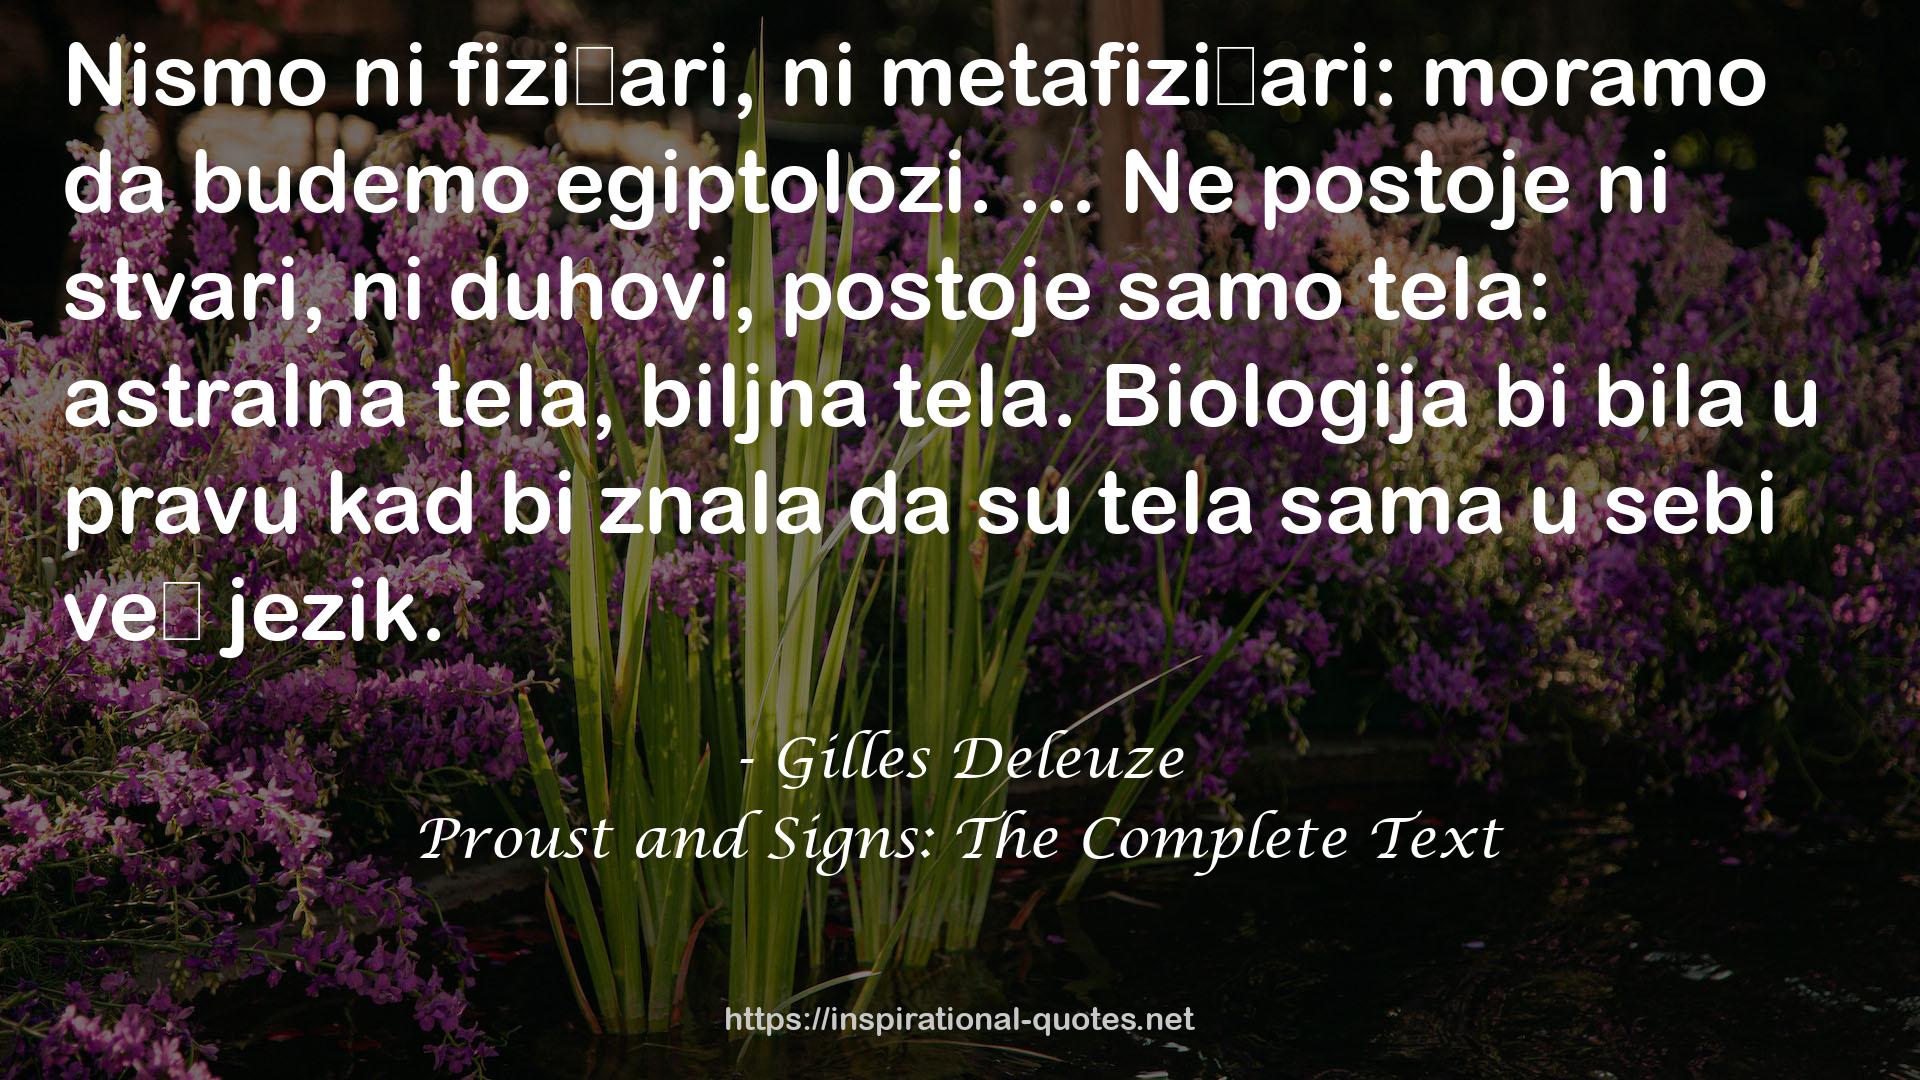 Proust and Signs: The Complete Text QUOTES